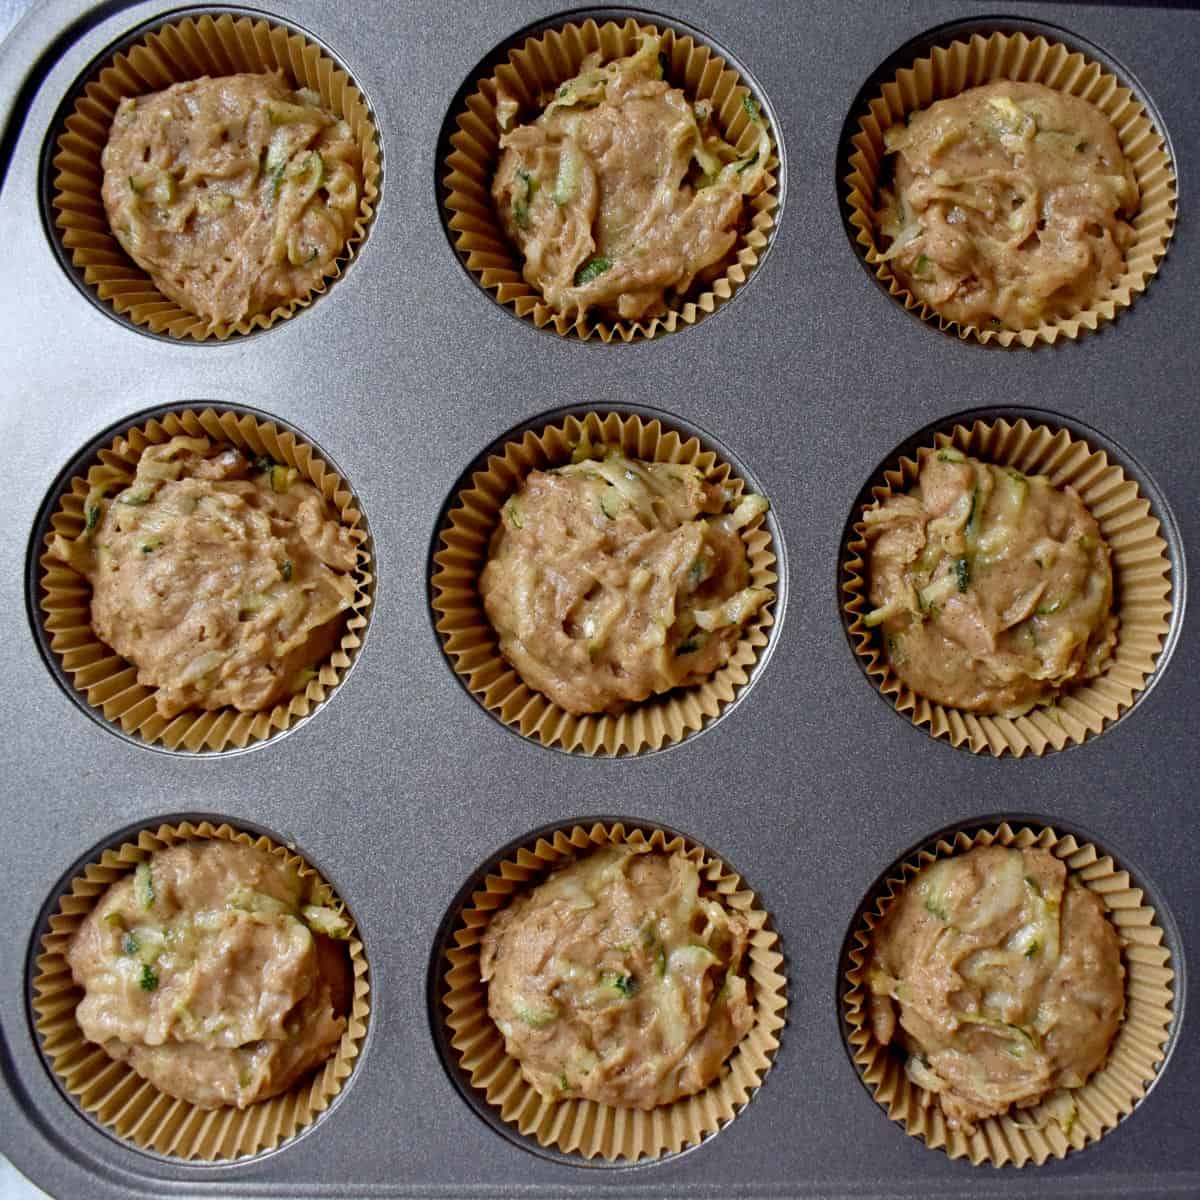 Lined muffin pan filled with gluten free zucchini muffin batter.